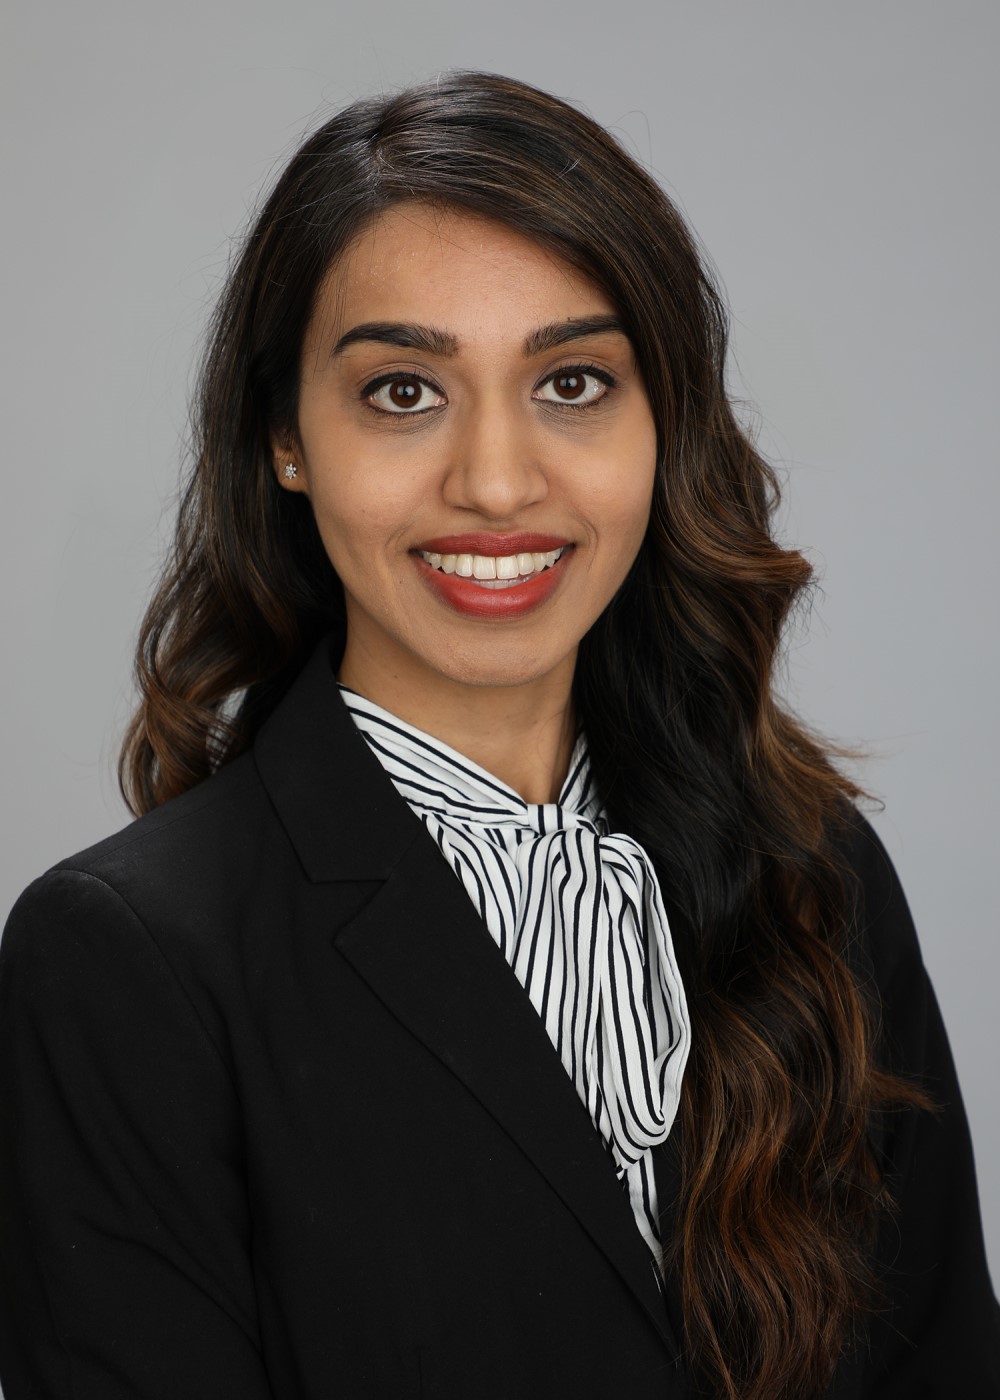 Dr. Ashvi Mittal, a pediatric dentist at the Flowery Branch location of Dr. Kwon Pediatric Dentistry